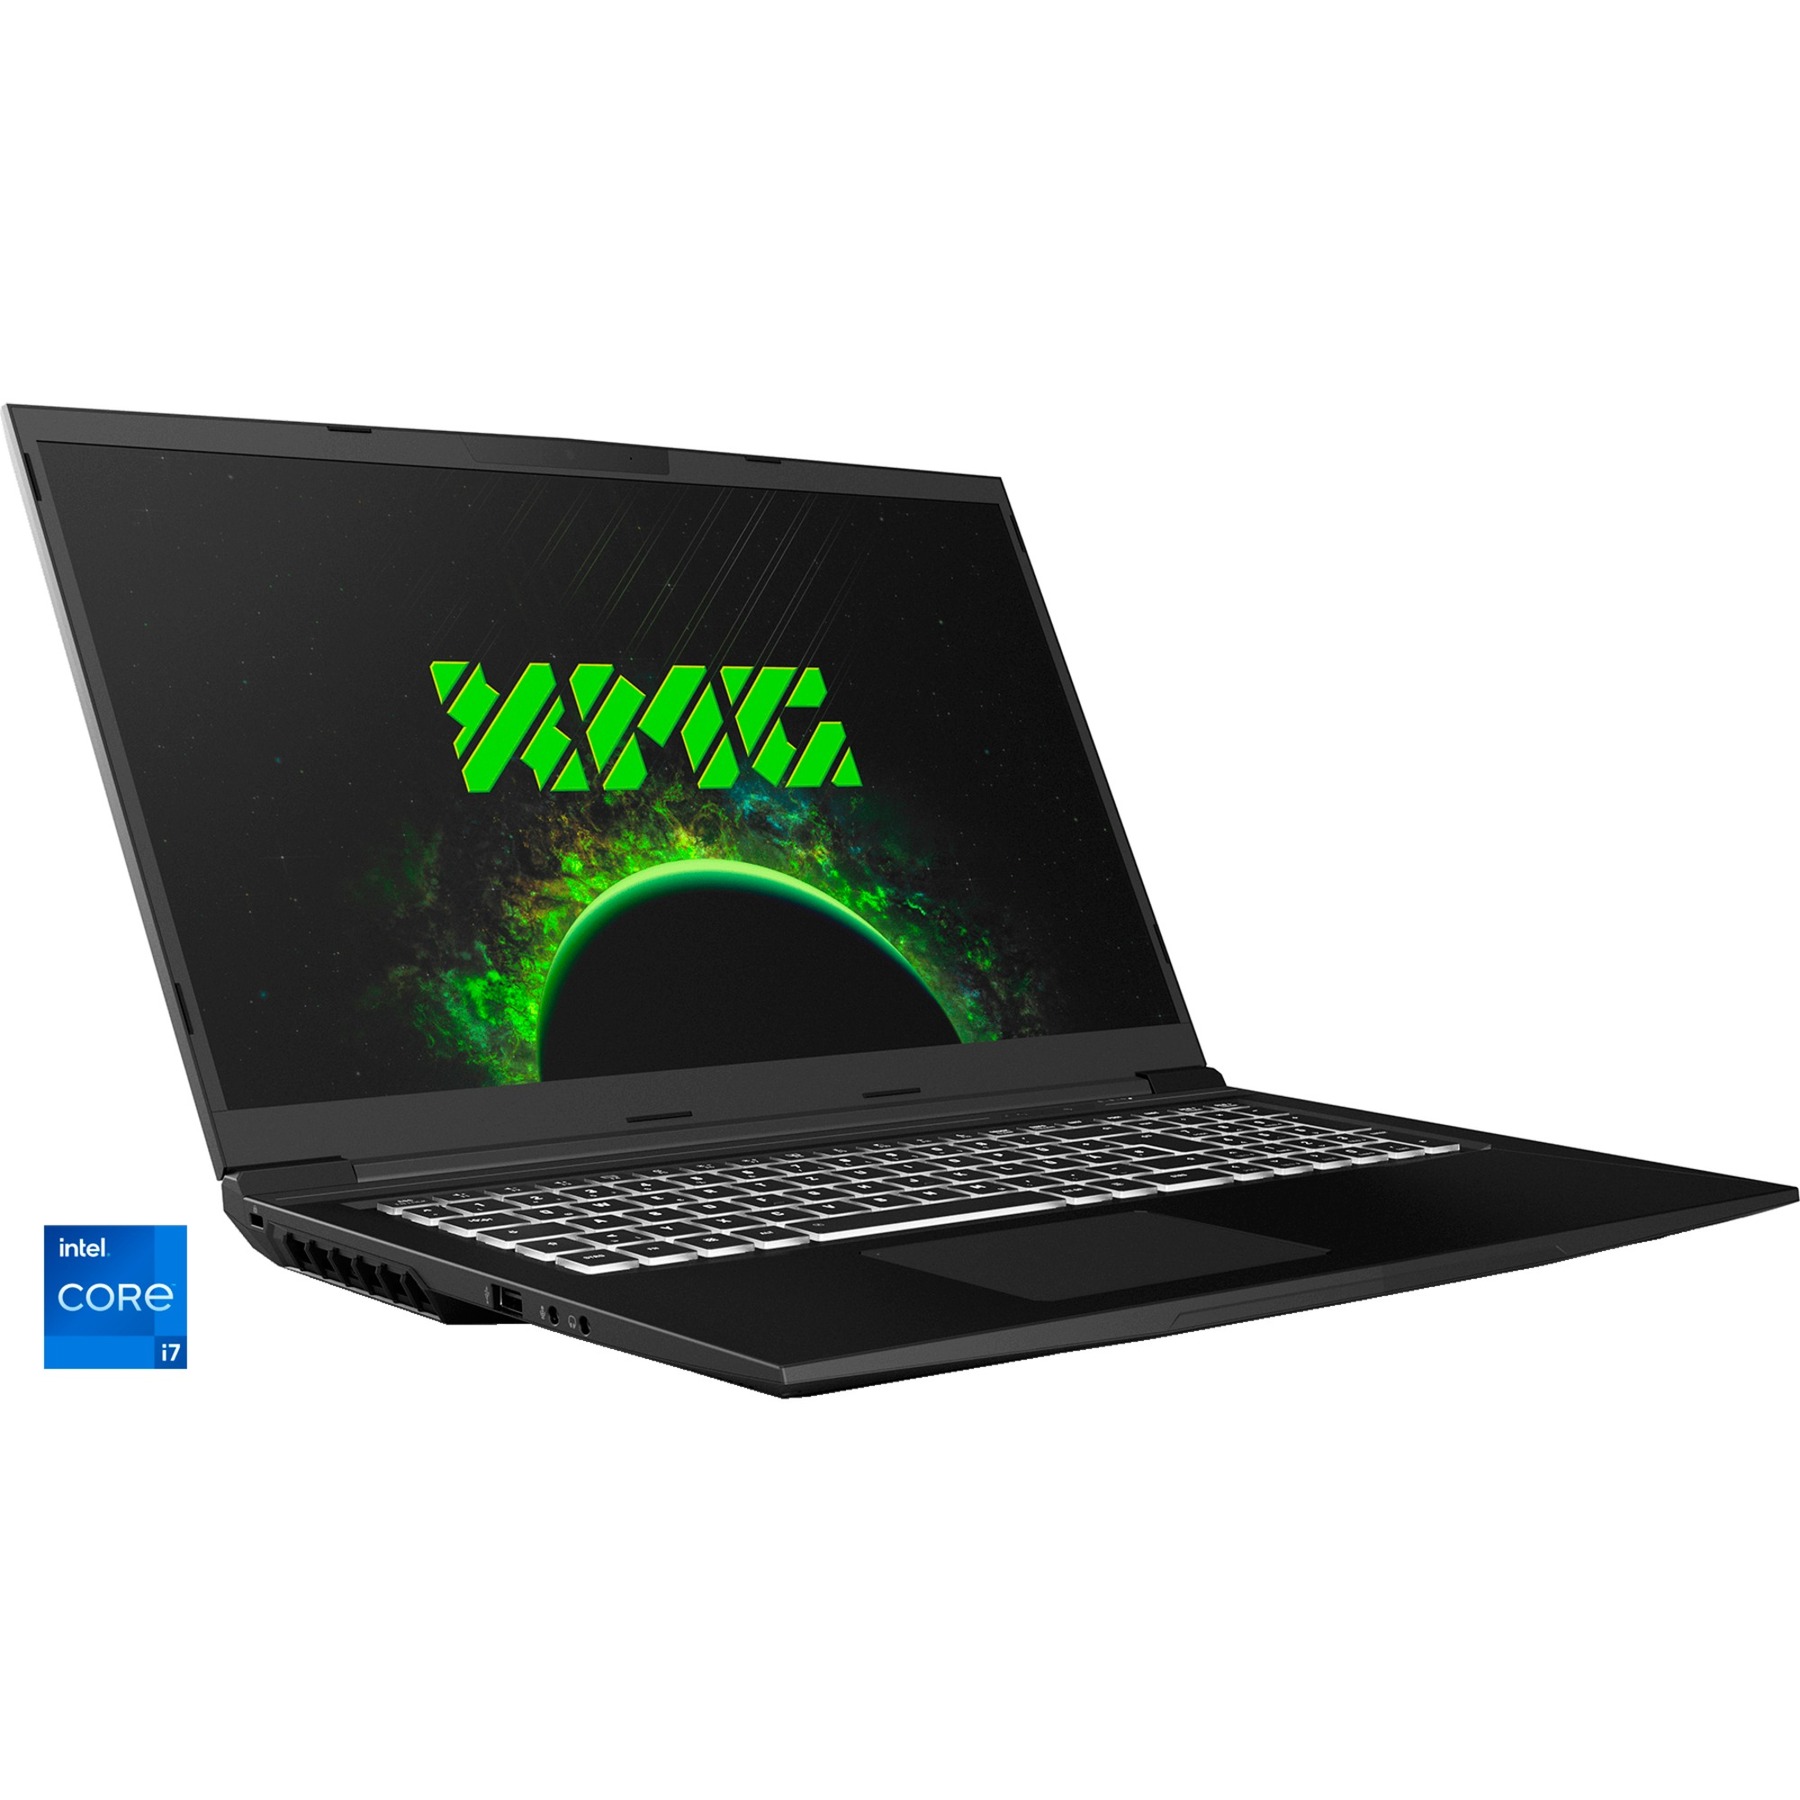 CORE 17 (10505859), Gaming-Notebook